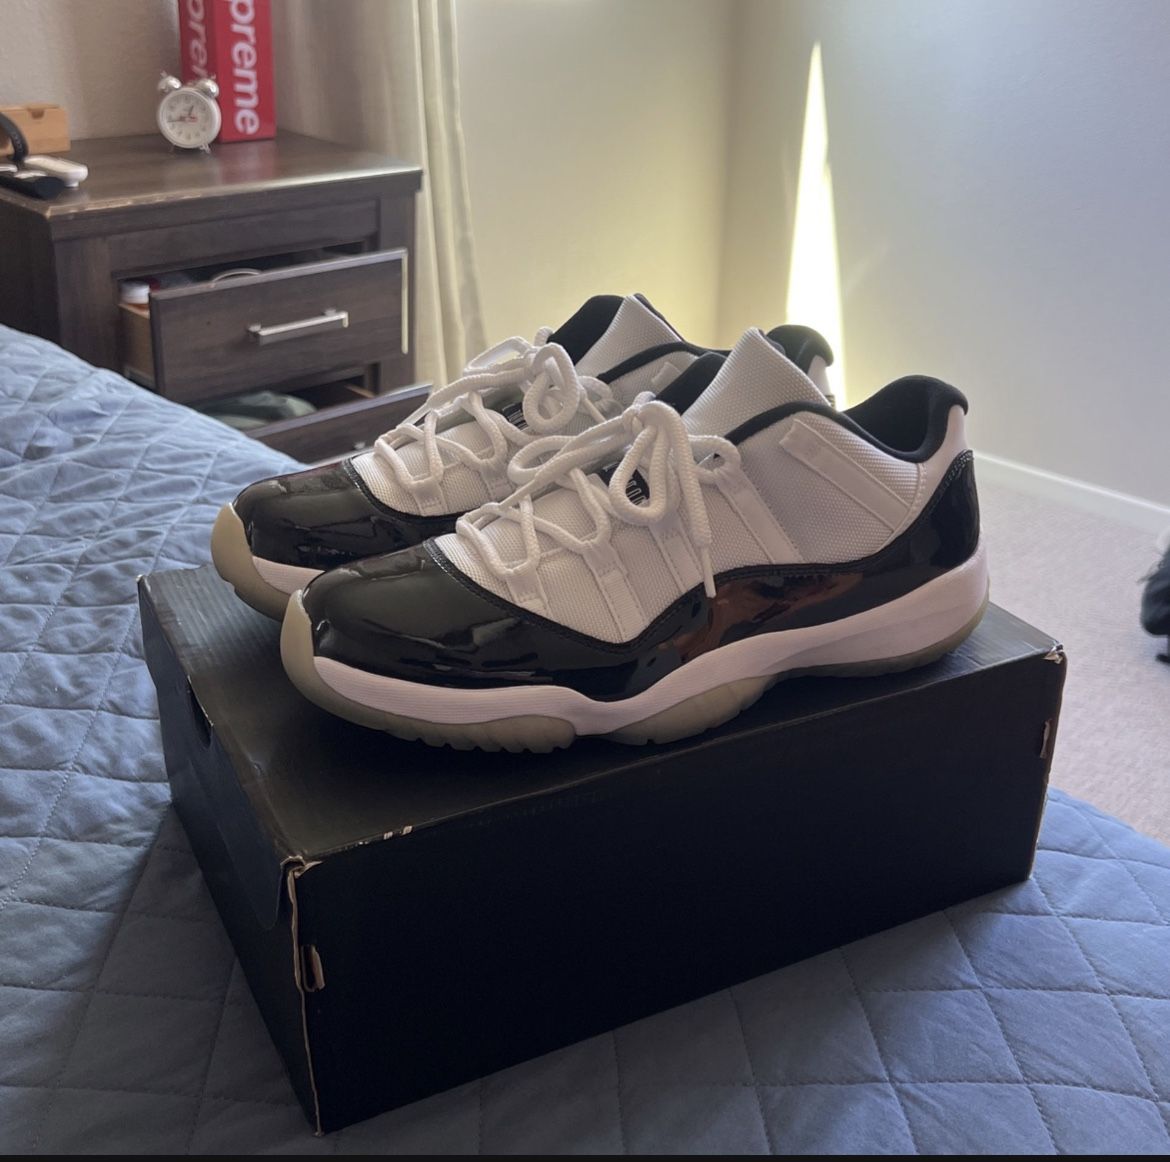 Concord 11 low 10.5